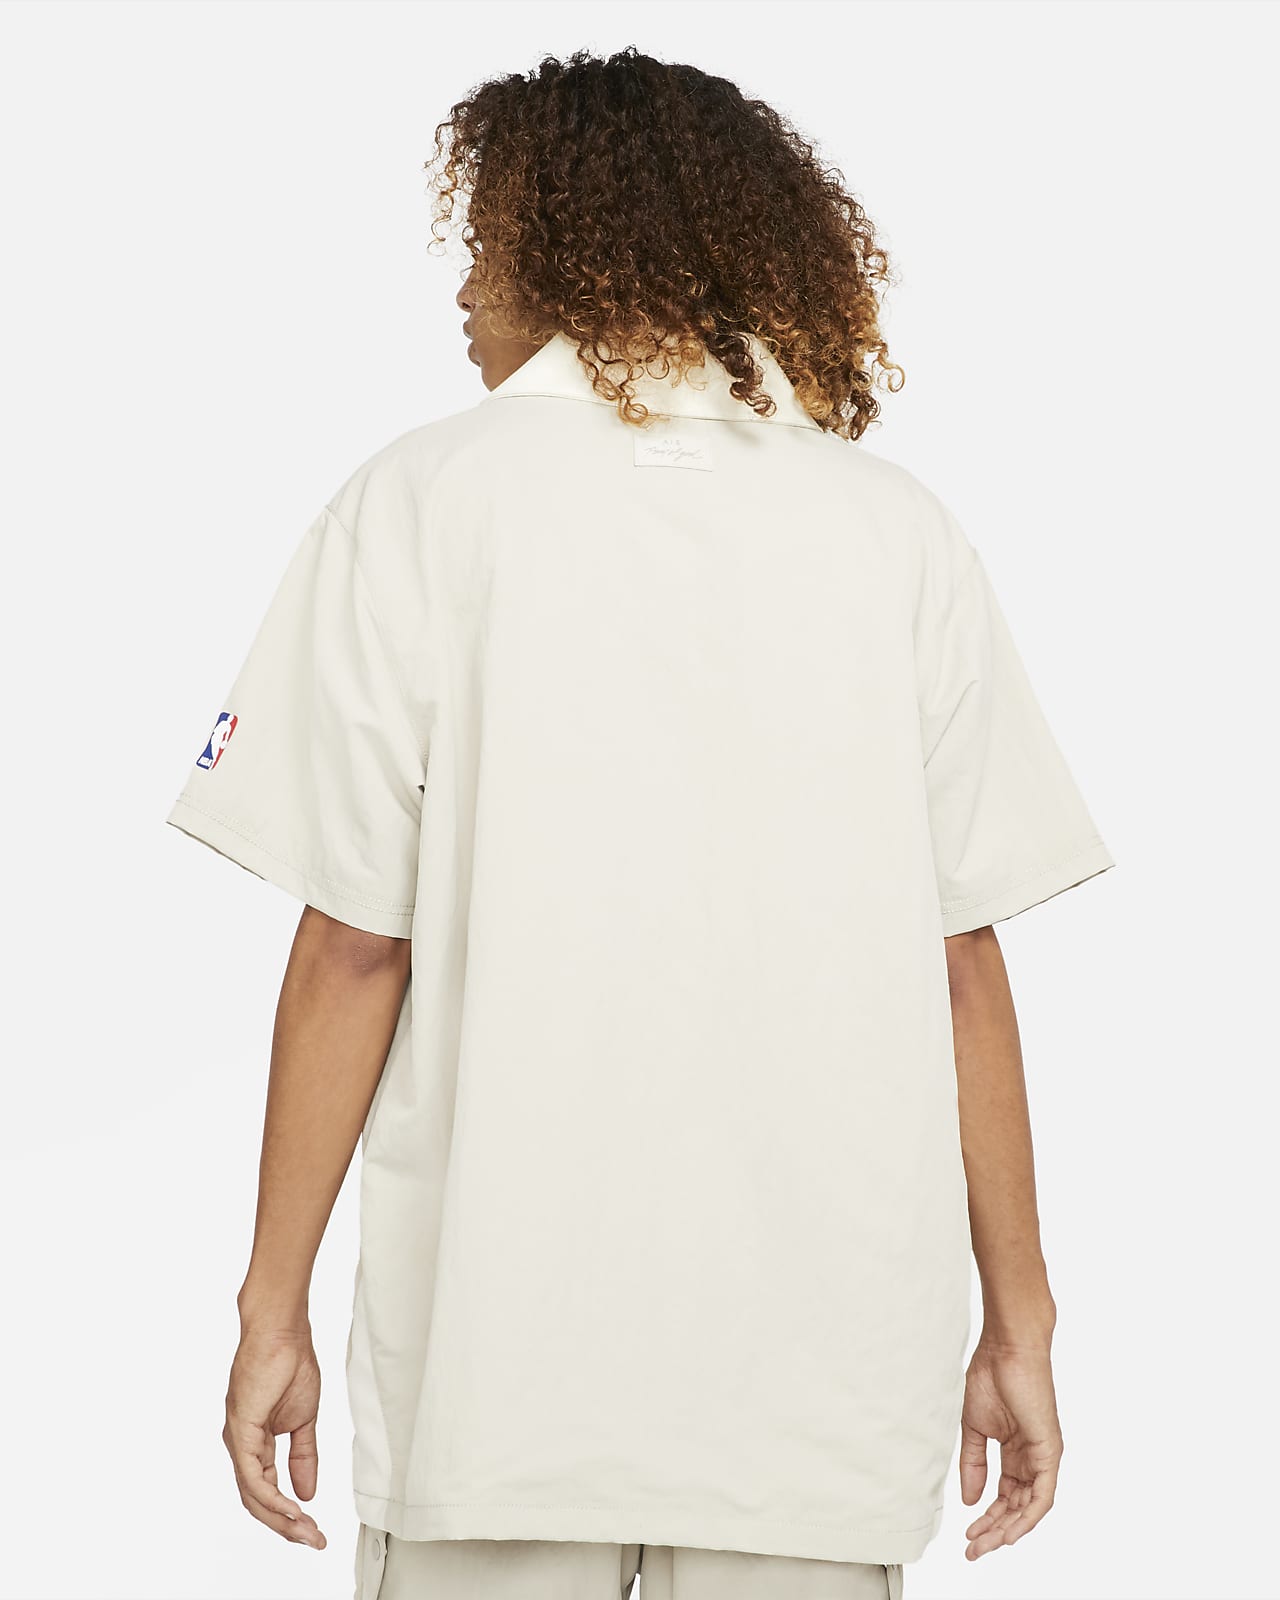 nike fear of god warm up top